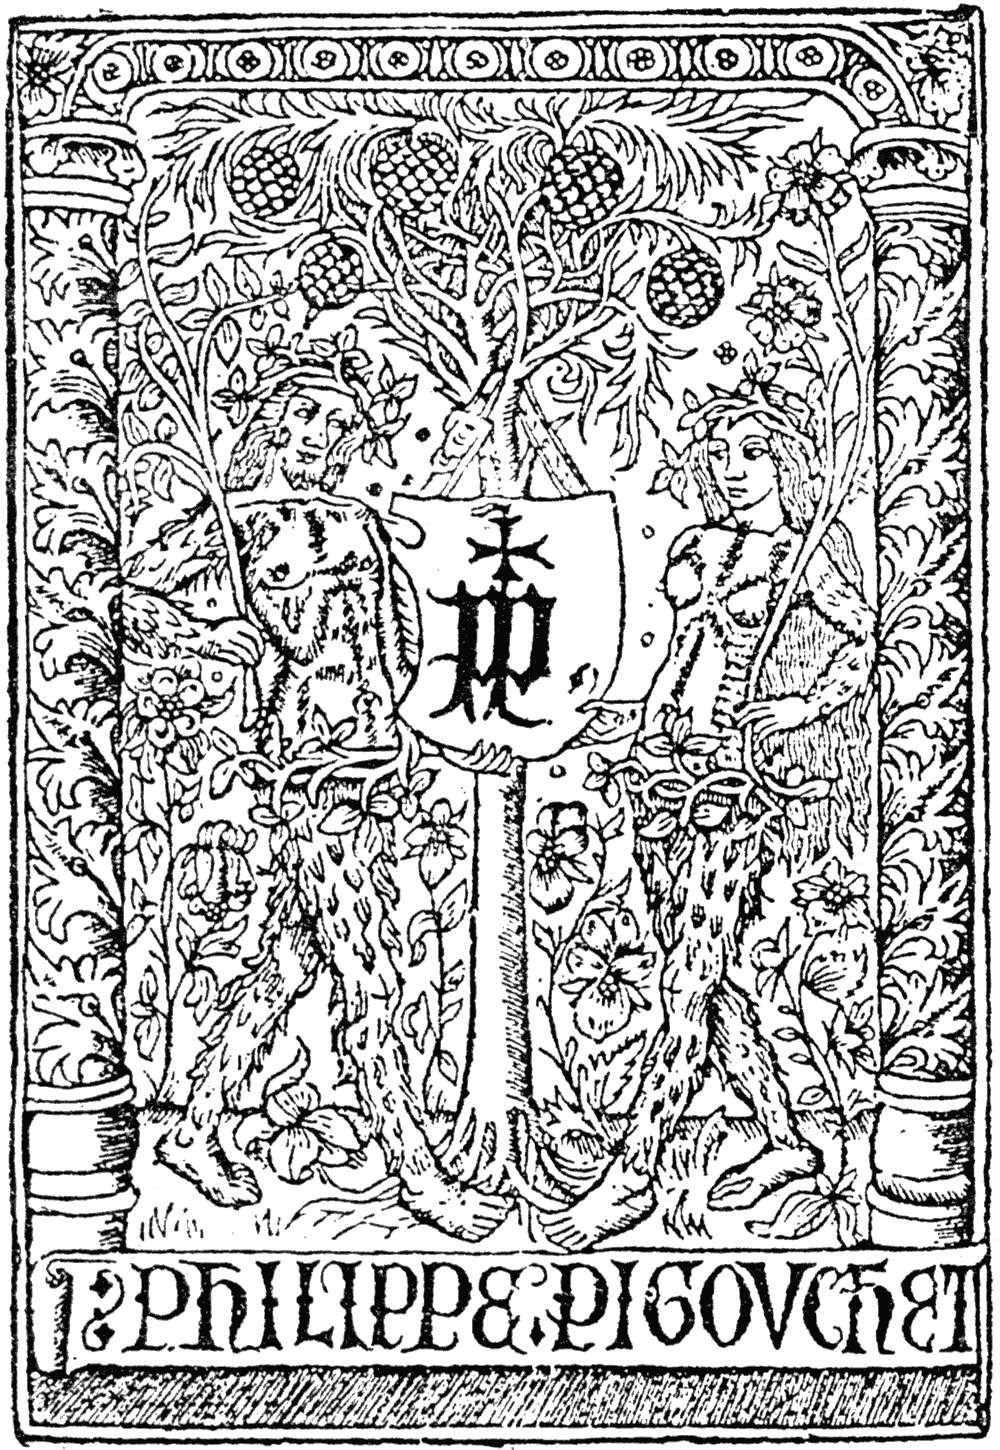 Mark of Philip Pigouchet, French printer and wood engraver of the fifteenth century.  From Henri Bouchot 'The Printed Book' (1887), page 71, published size in Bouchot, 5cm wide by 7.4cm high.